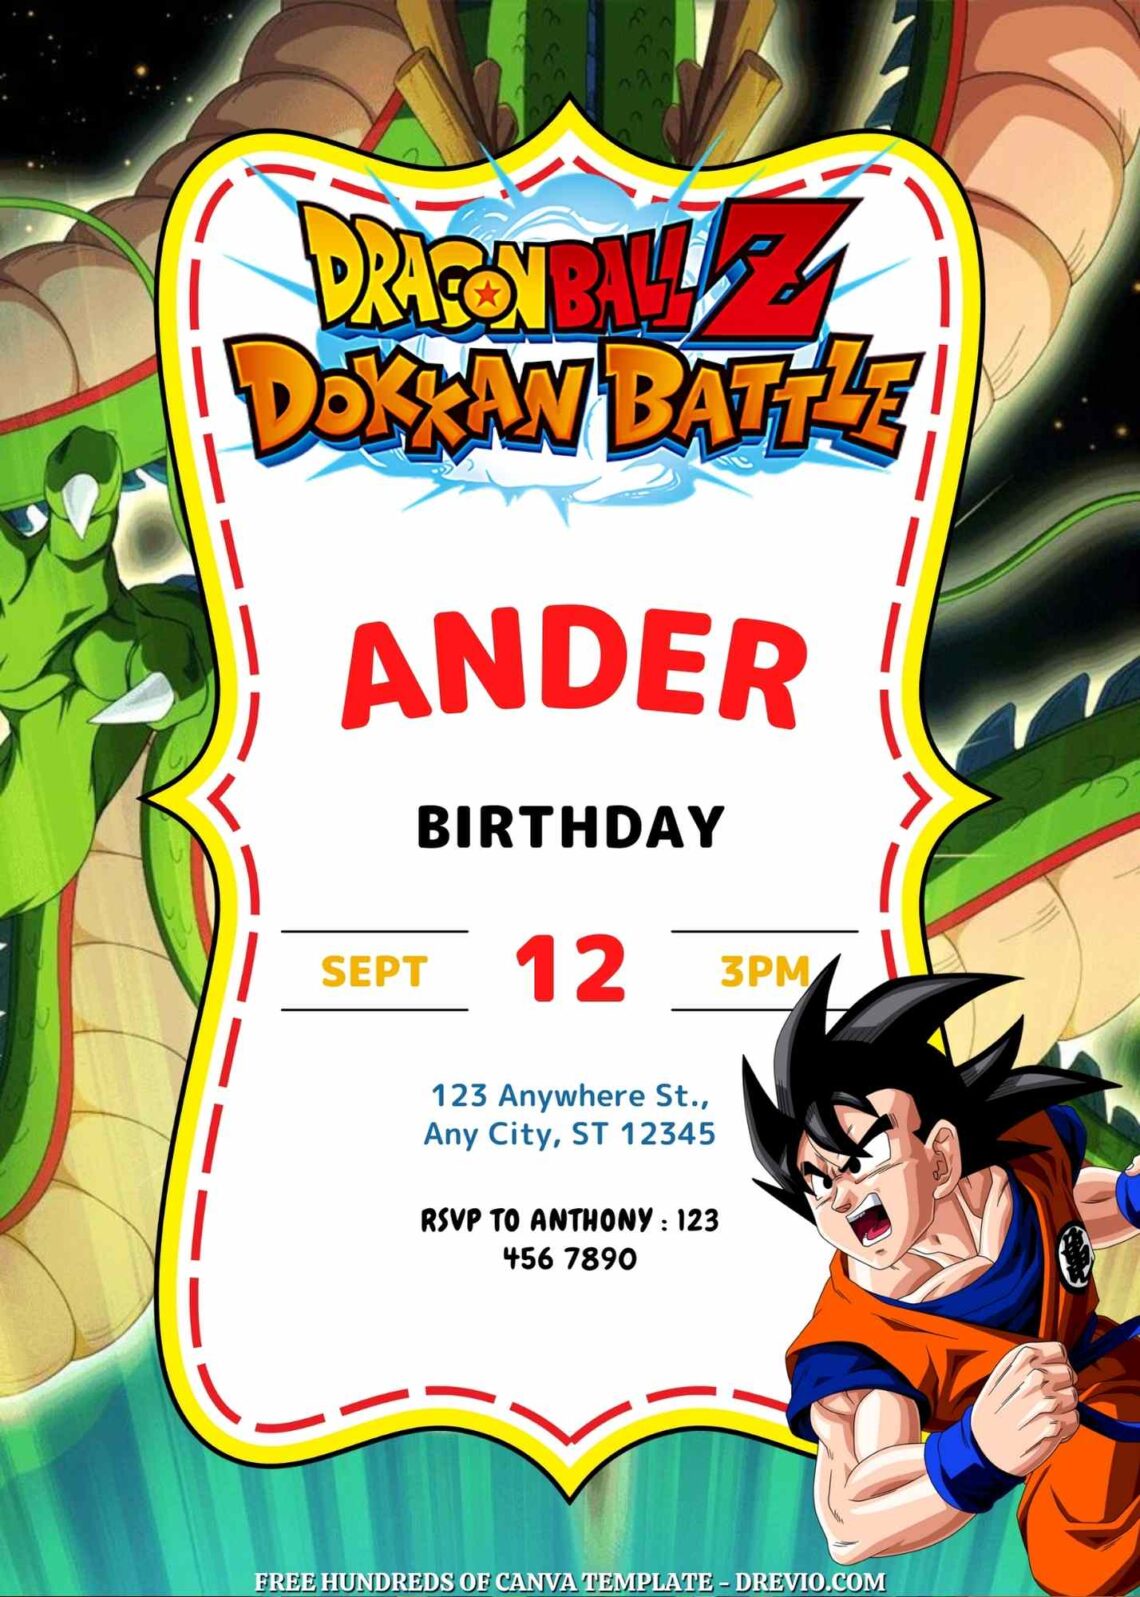 Free Dragon Ball Z Birthday Invitations with Dragon in the Background